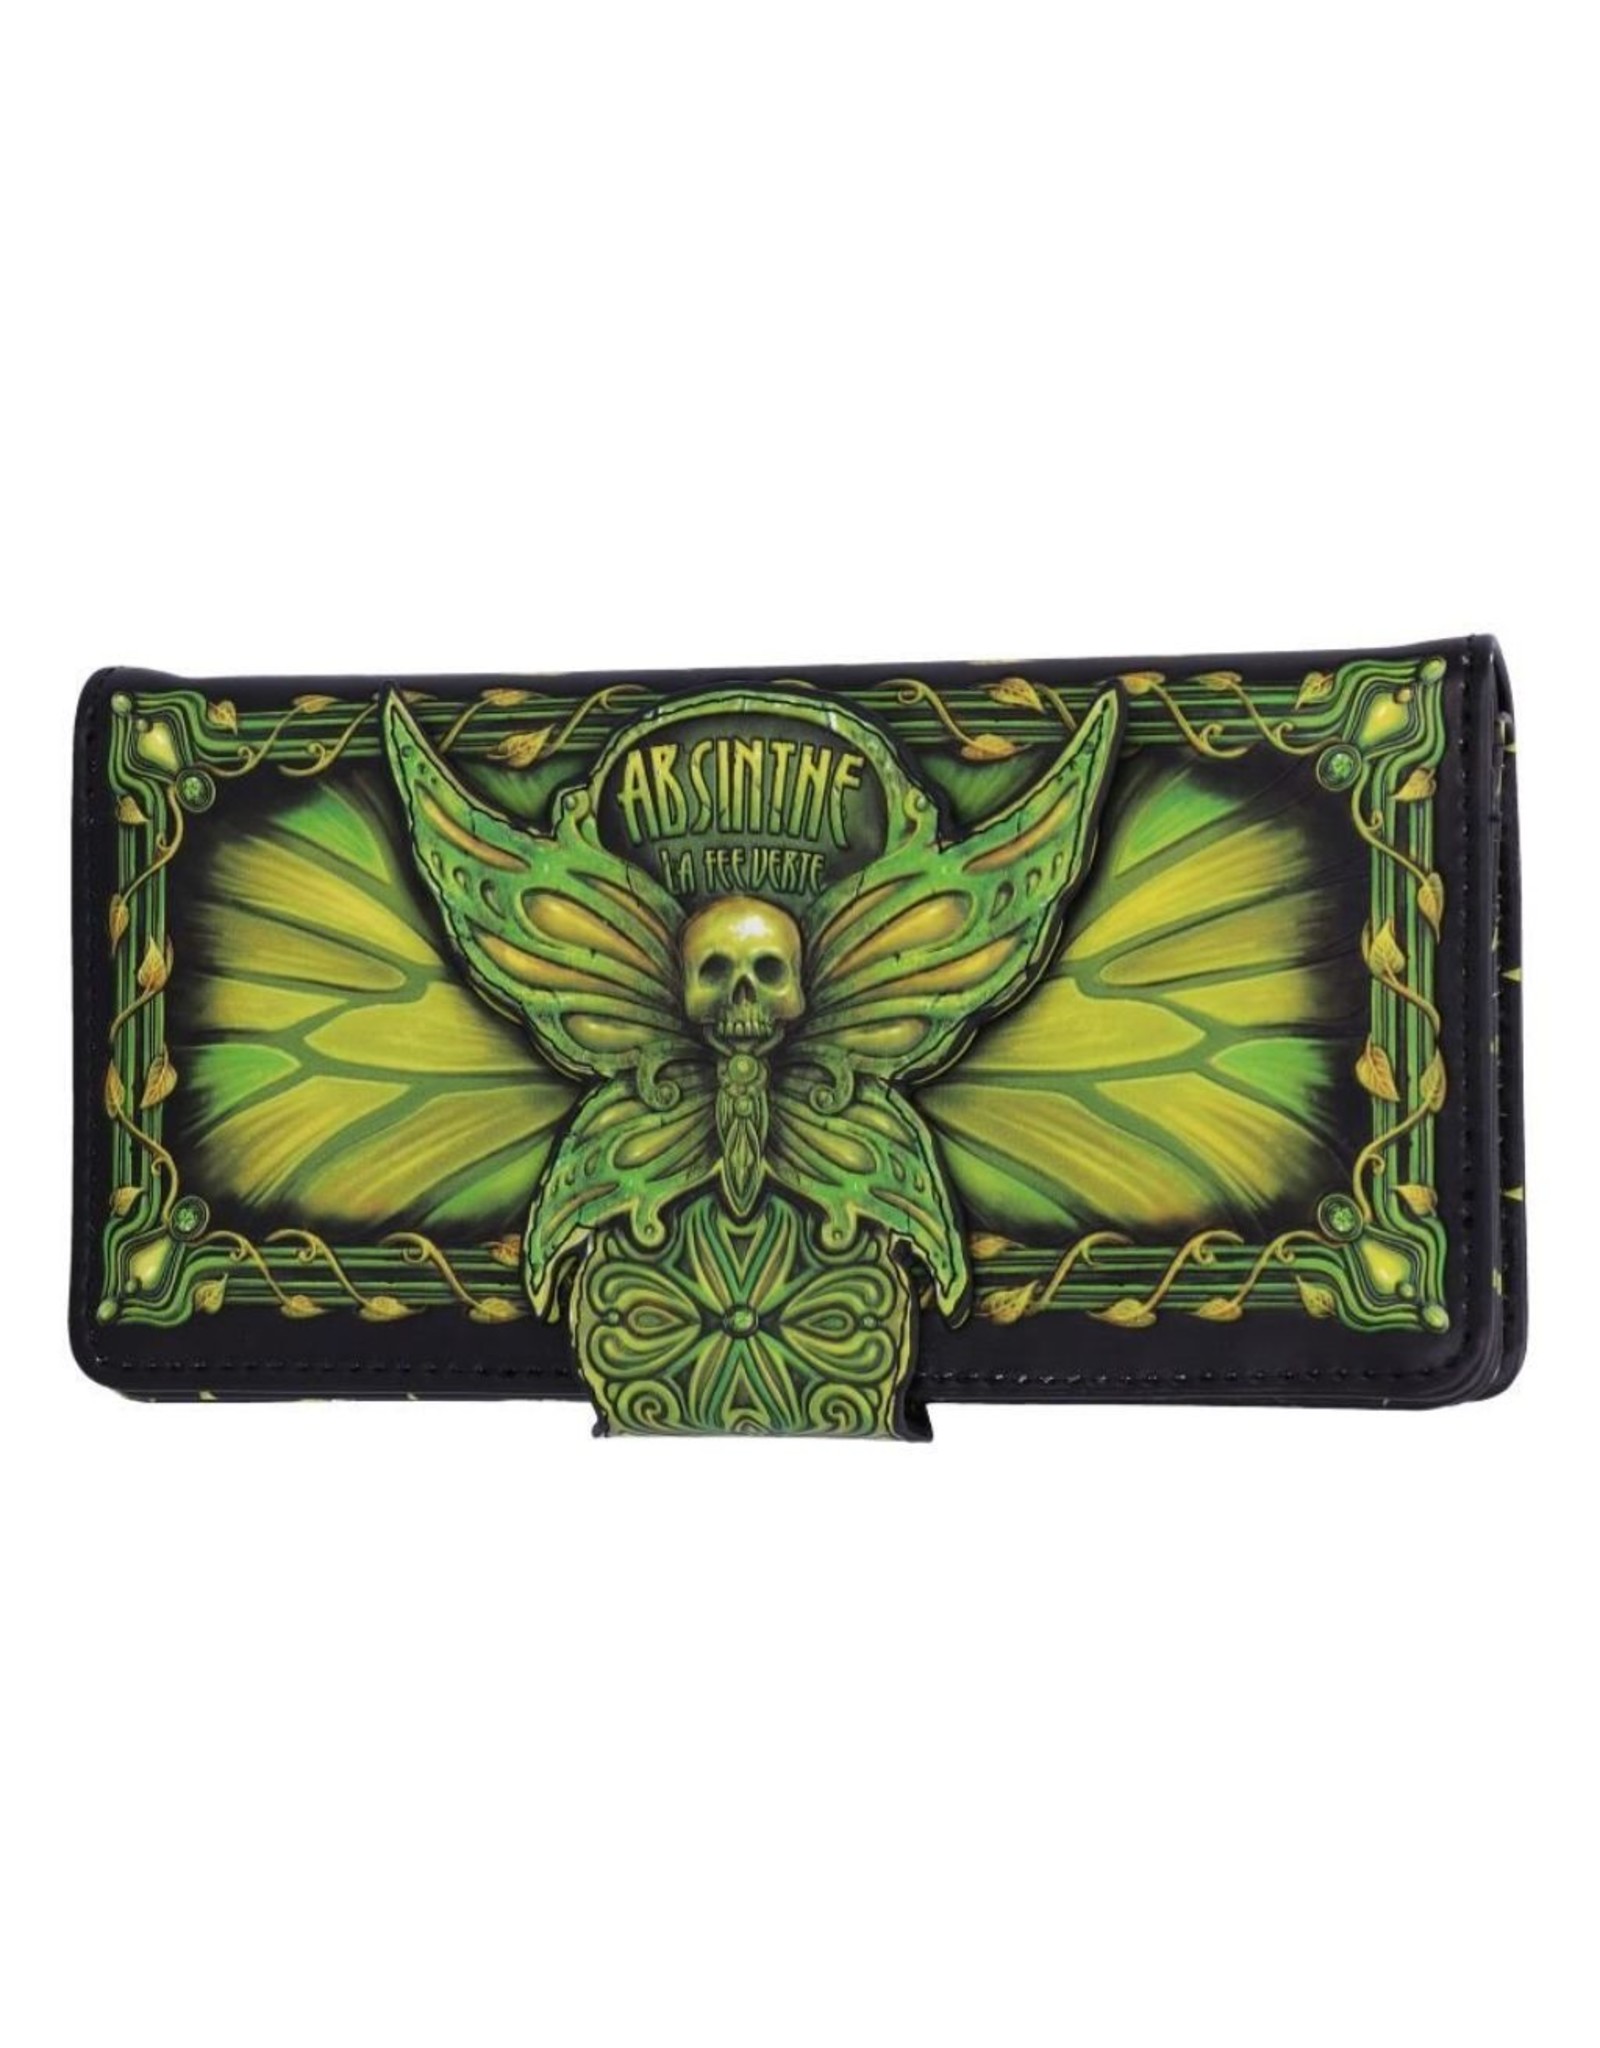 Nemesis Now Gothic wallets and purses - Absinthe La Fee Verte Green Fairy Embossed Purse Nemesis Now